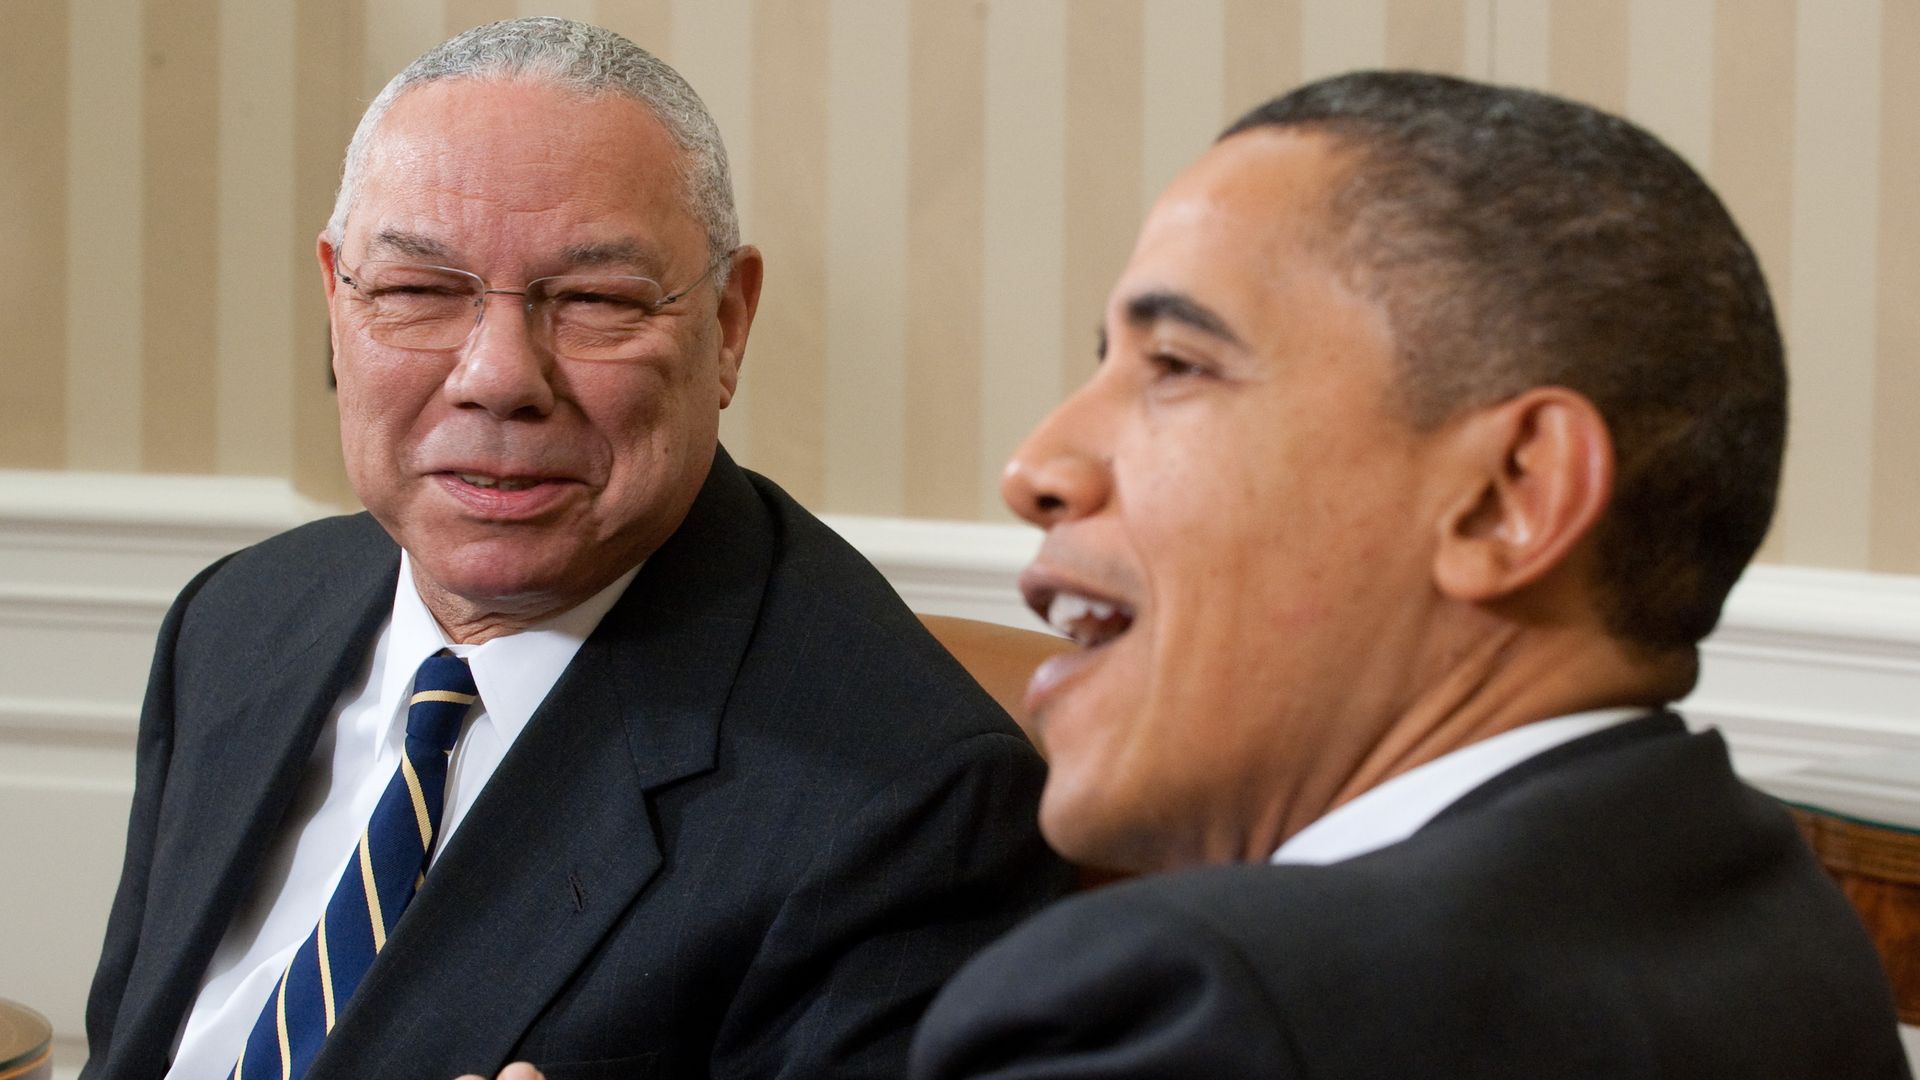 Photo of Colin Powell and Barack Obama sitting together and talking with smiles on their faces